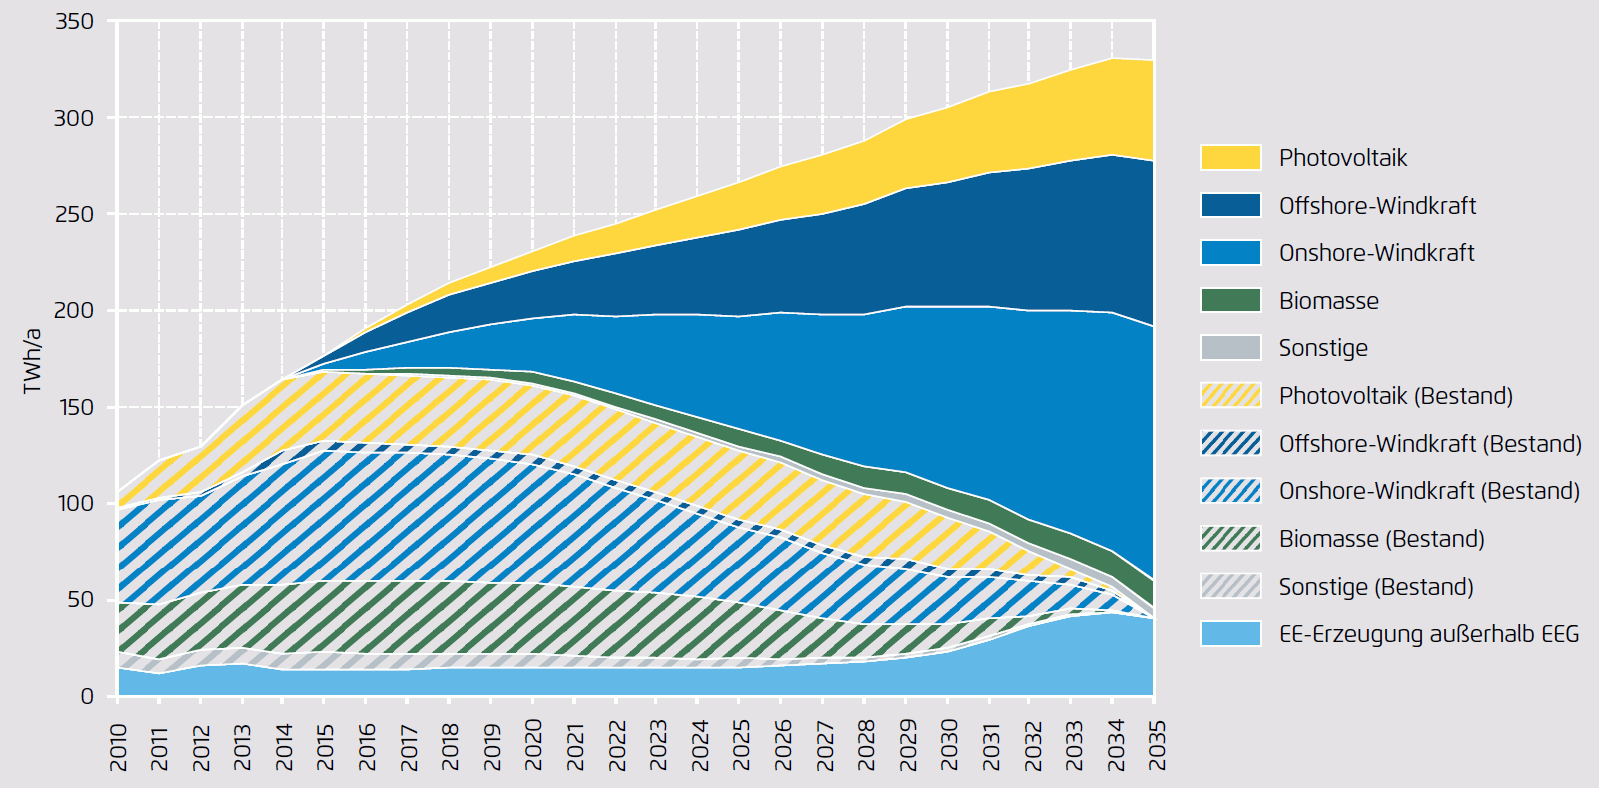 Renewable Power Production in Germany by renewable technology